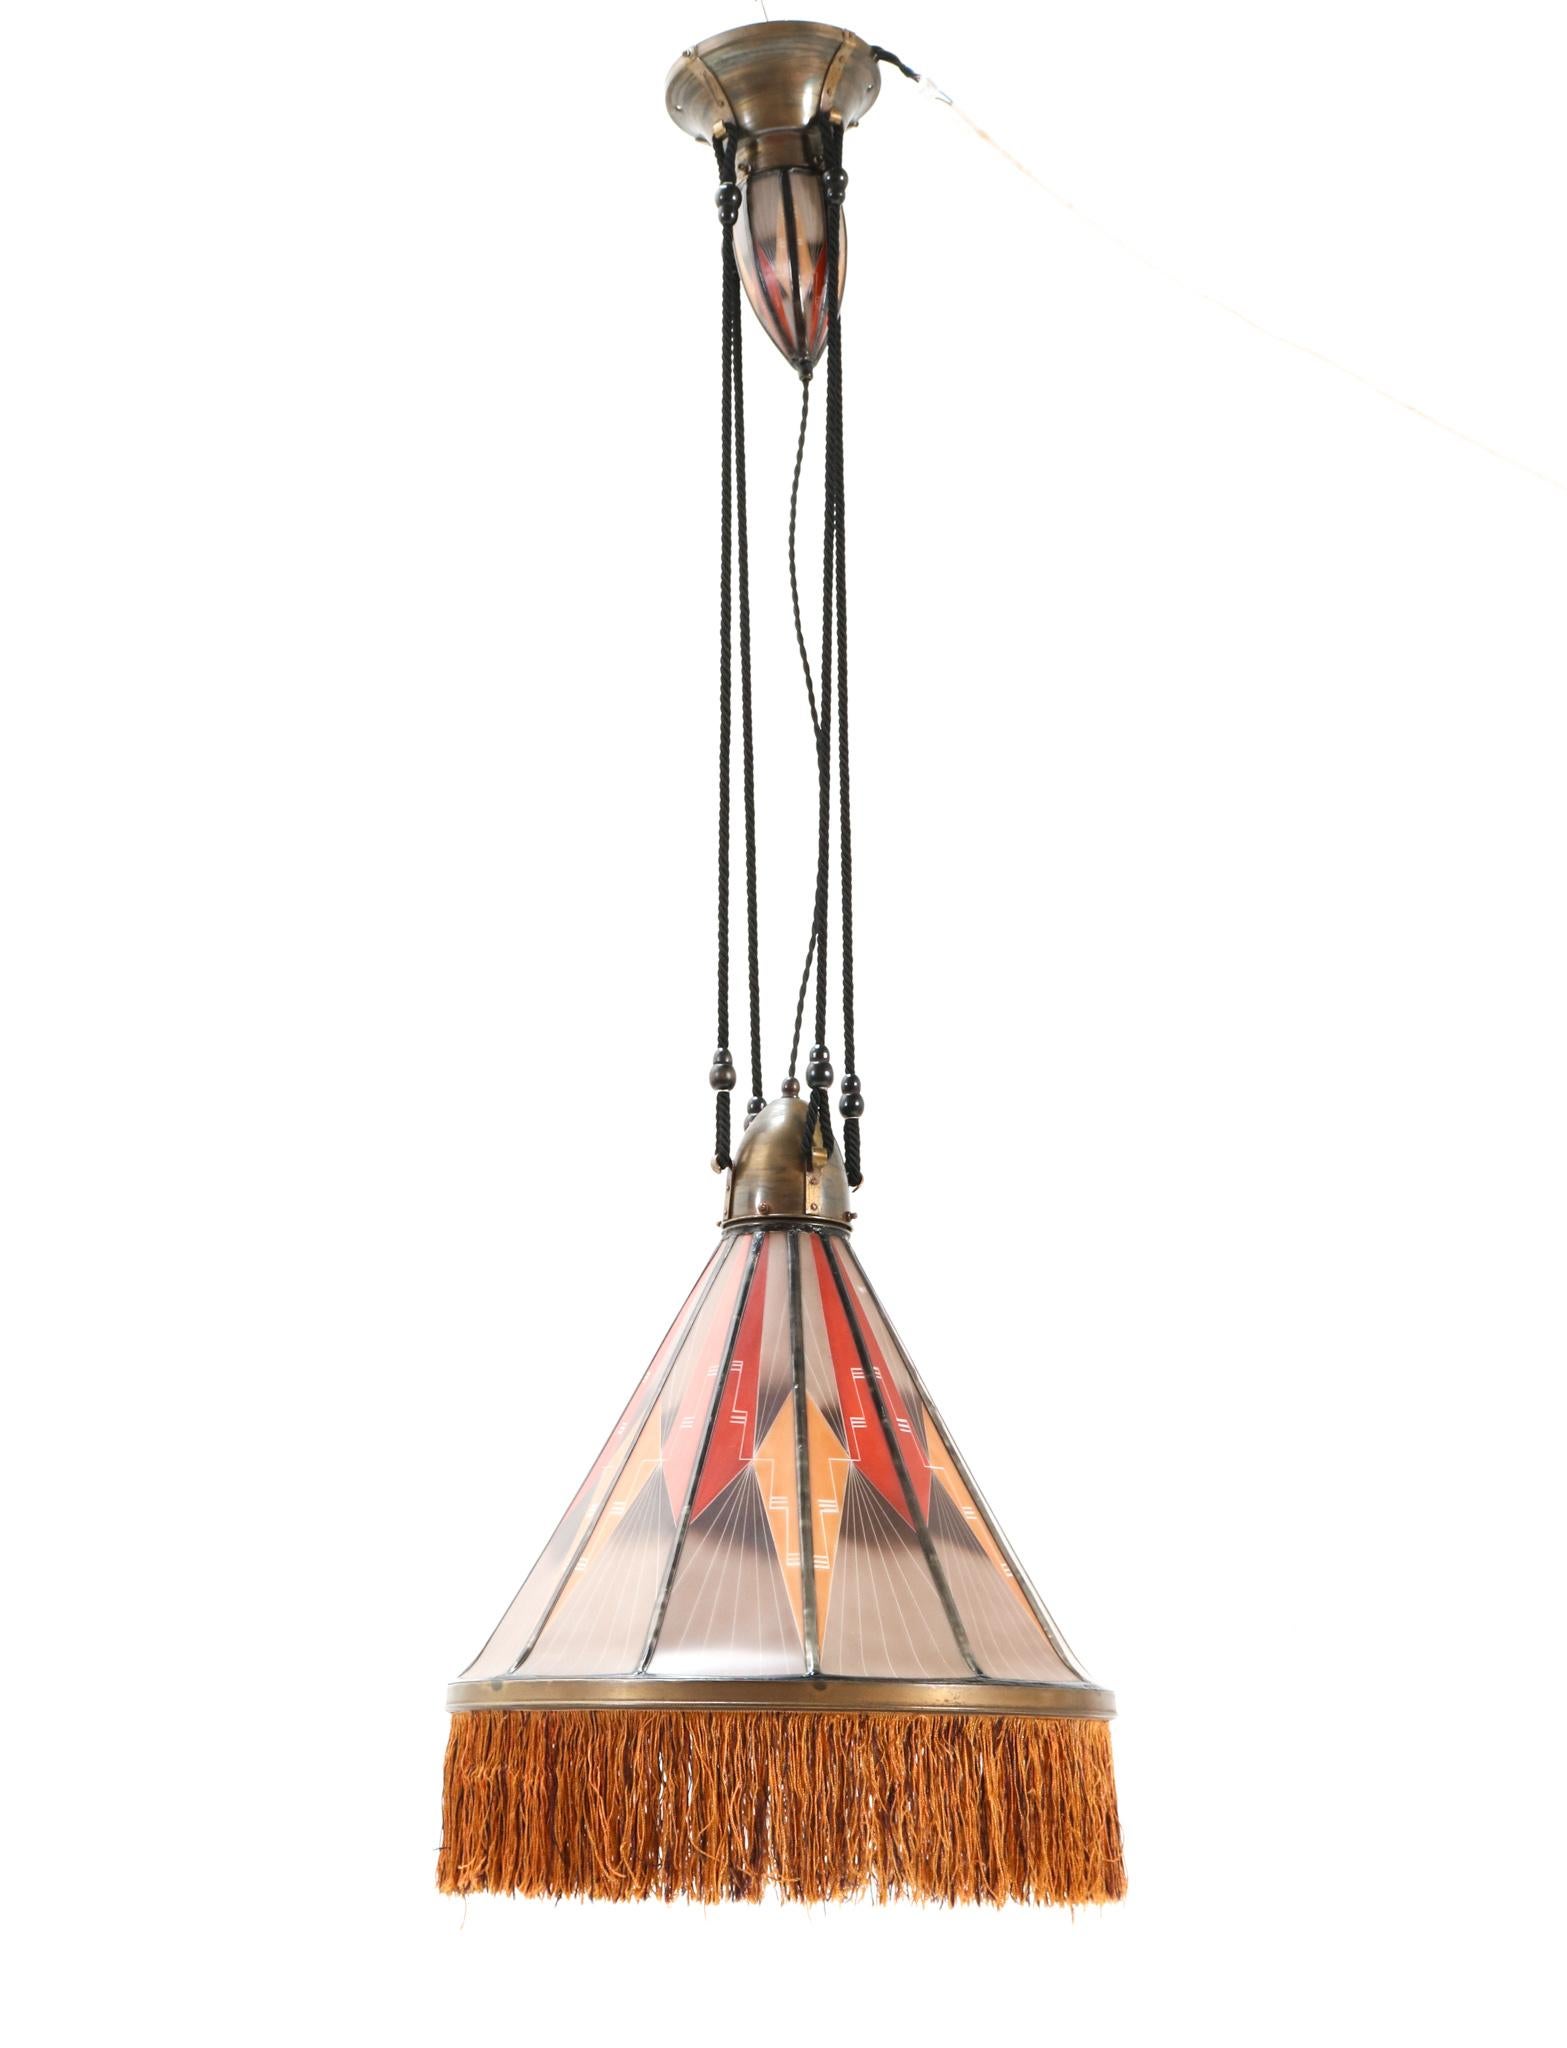 Magnificent and ultra rare Art Deco Amsterdamse School chandelier.
Design by Hendrik Cornelis Herens for De Nieuwe Honsel.
Striking Dutch design from the 1920s.
Model D223 and ultra rare because of the decorations in the stained glass!
Original